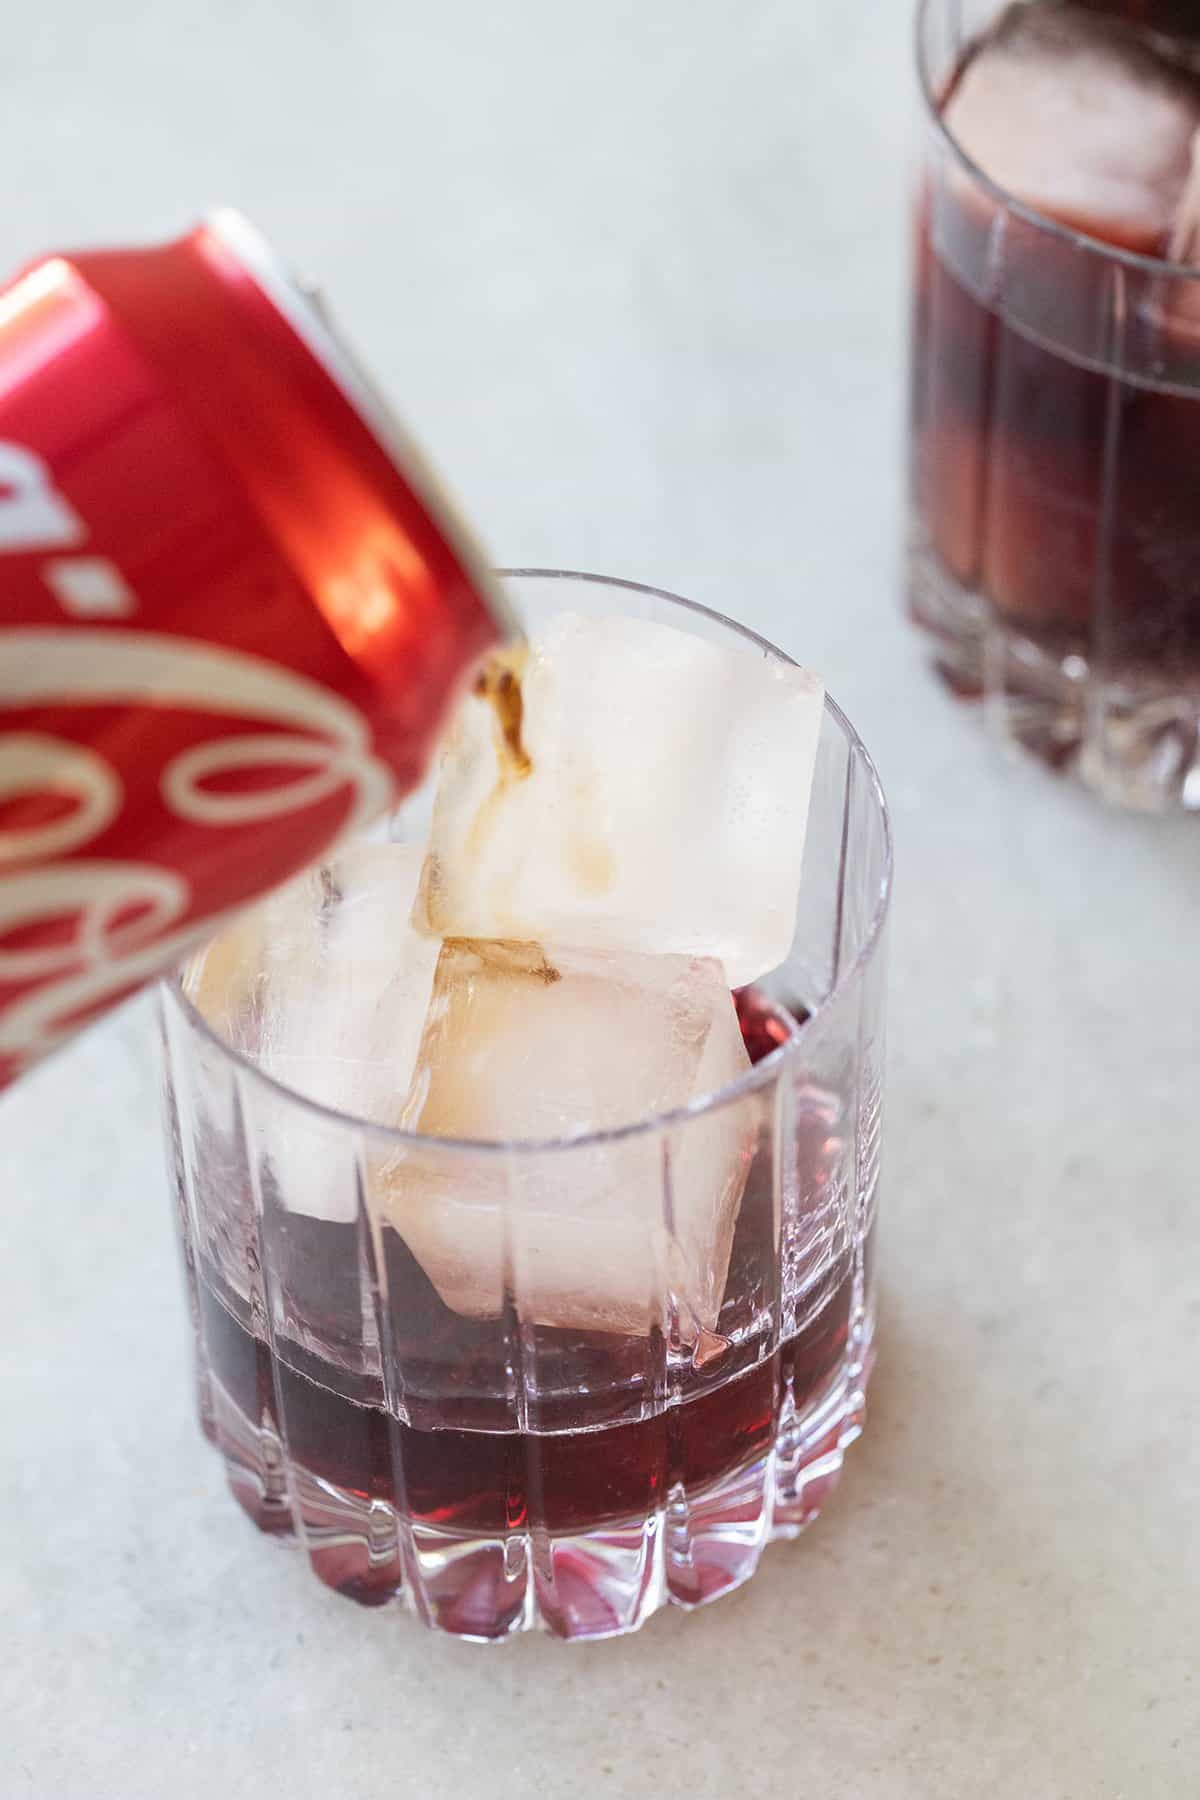 Pouring coke into a glass with red wine to make a Kalimotxo recipe. 